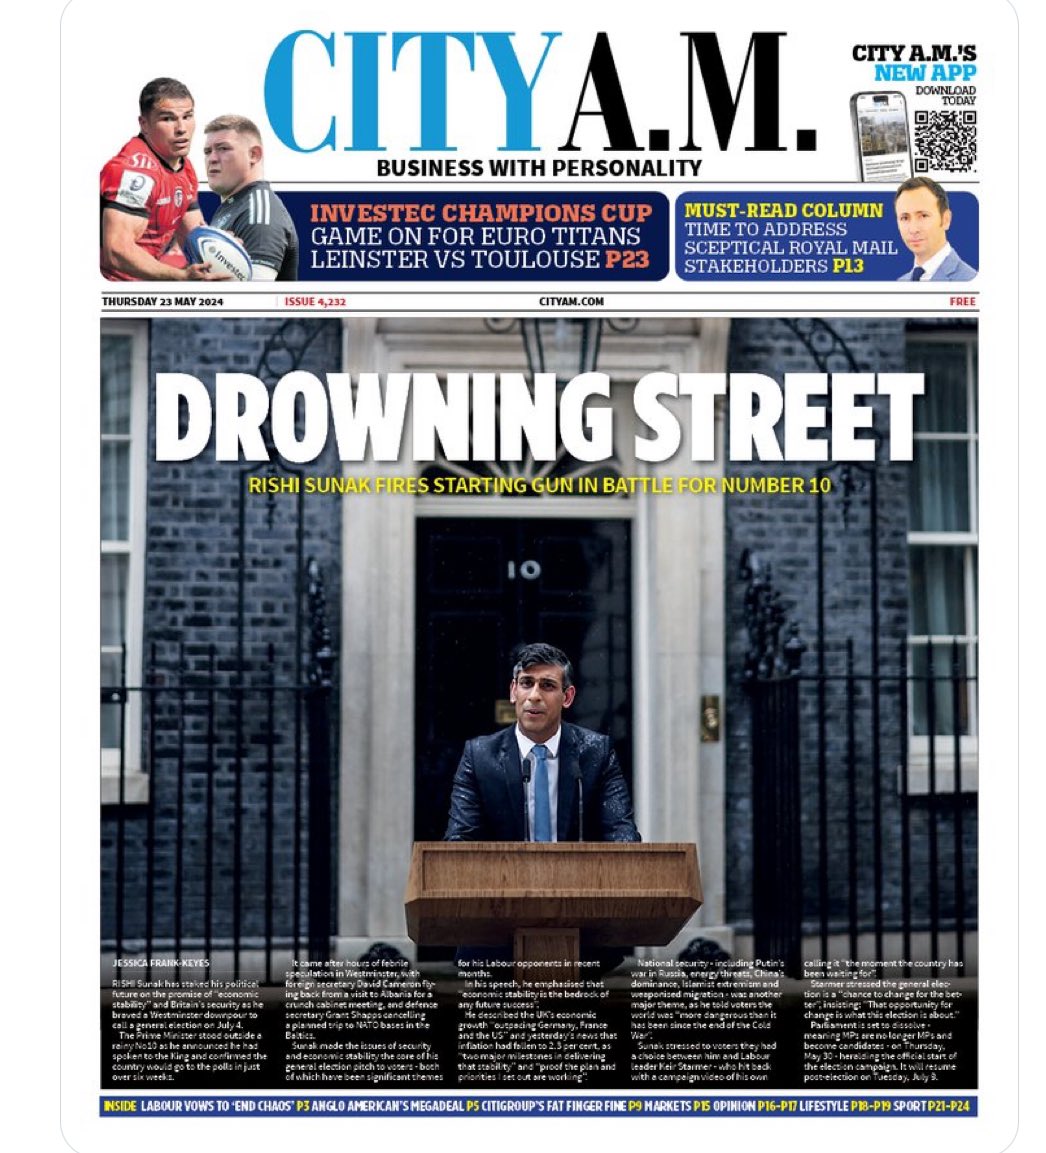 “Drown & out” in the @DailyMirror. “Things can only get wetter” in the @Telegraph, or “Drowning Street” in @CityAM. Which is your favourite raining pun in today’s UK papers? #GeneralElection #GE